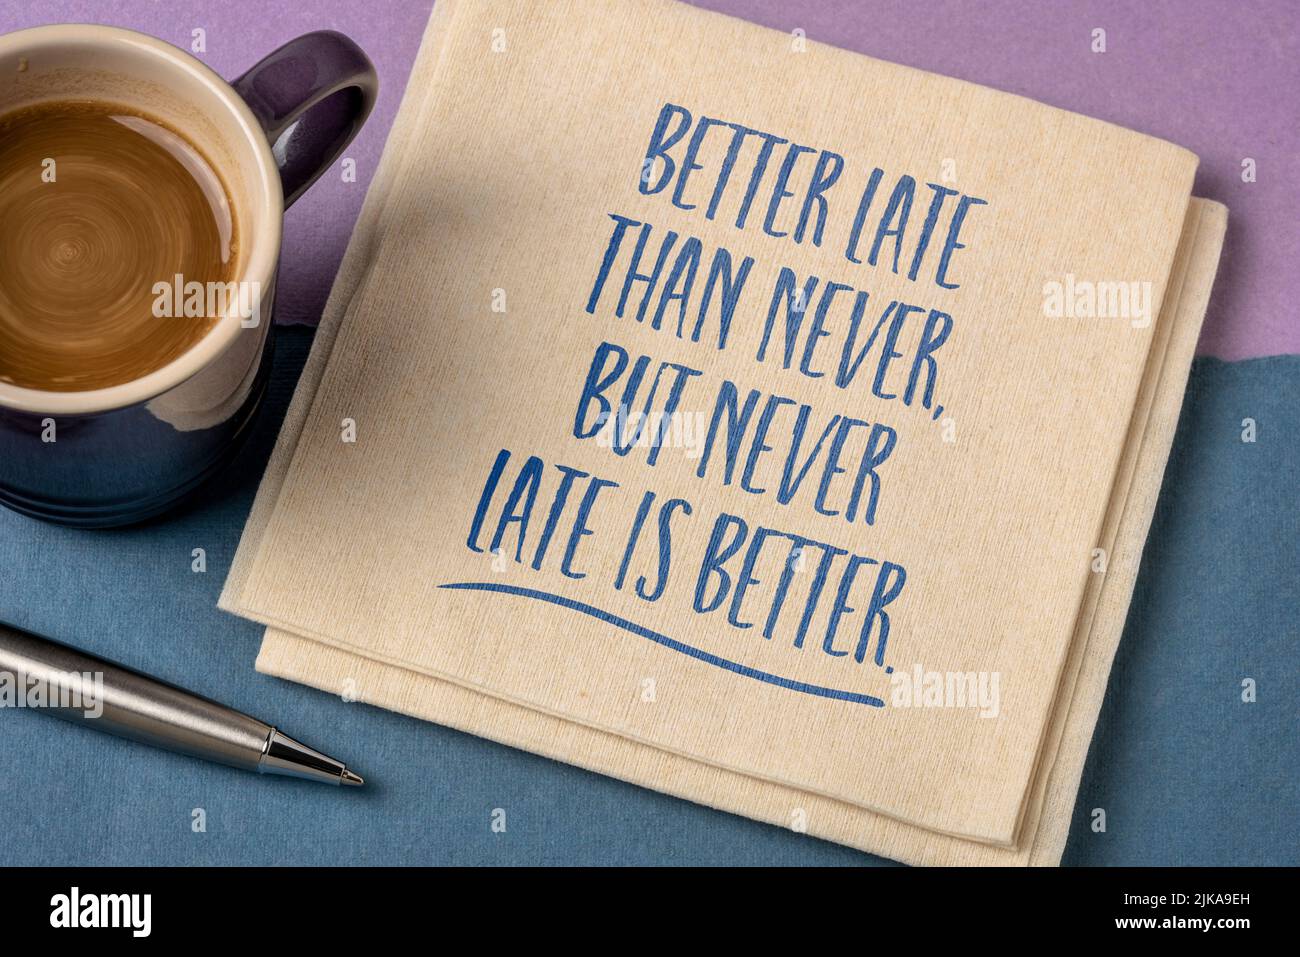 better late than never, but never late is better - inspirational reminder on a napkin, personal development concept Stock Photo